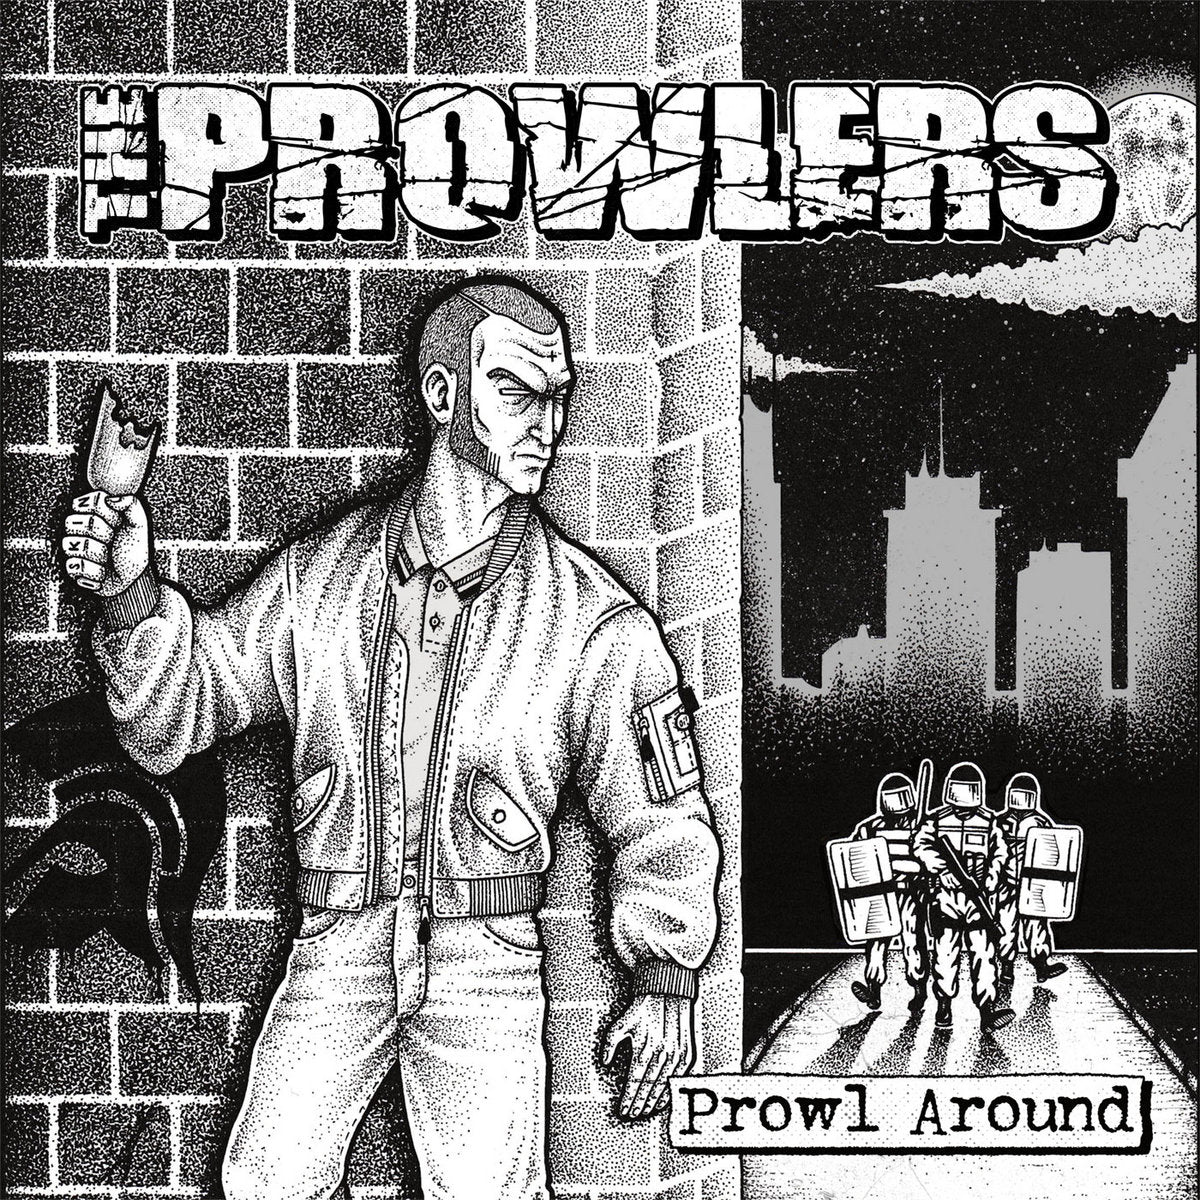 The Prowlers - "Prowl Around" LP